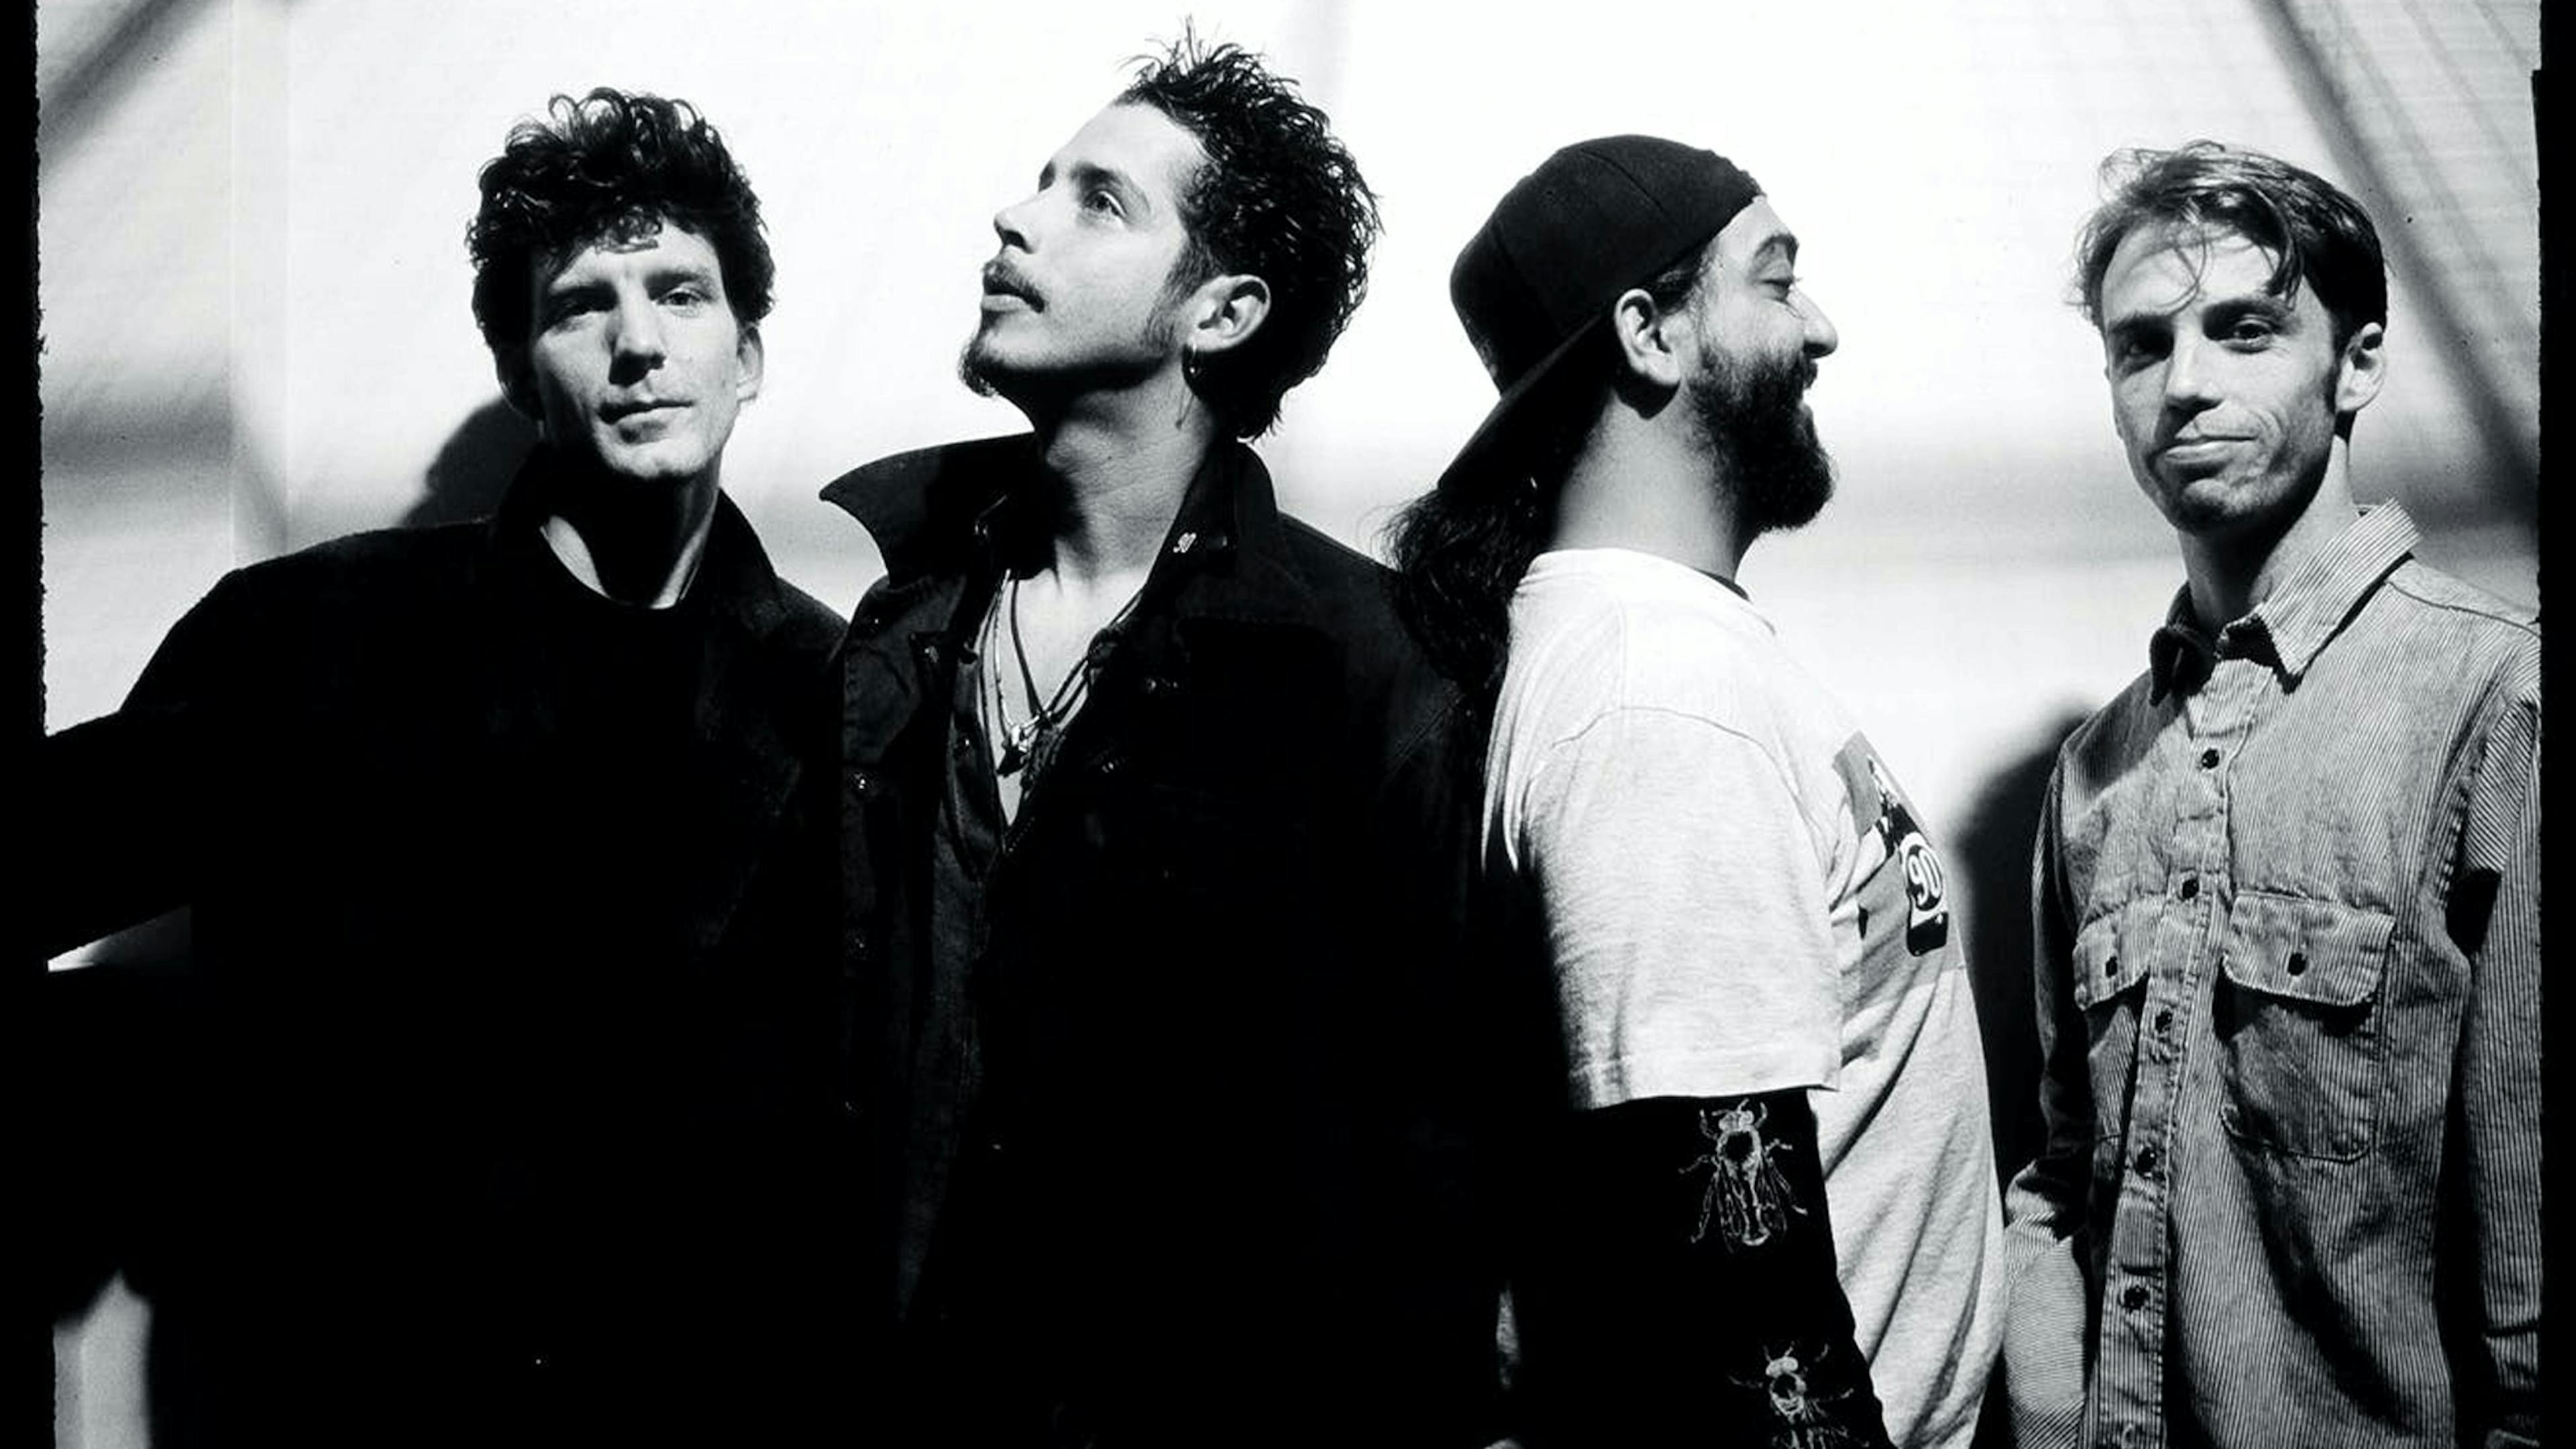 The haunting, traumatic story behind Soundgarden’s Superunknown